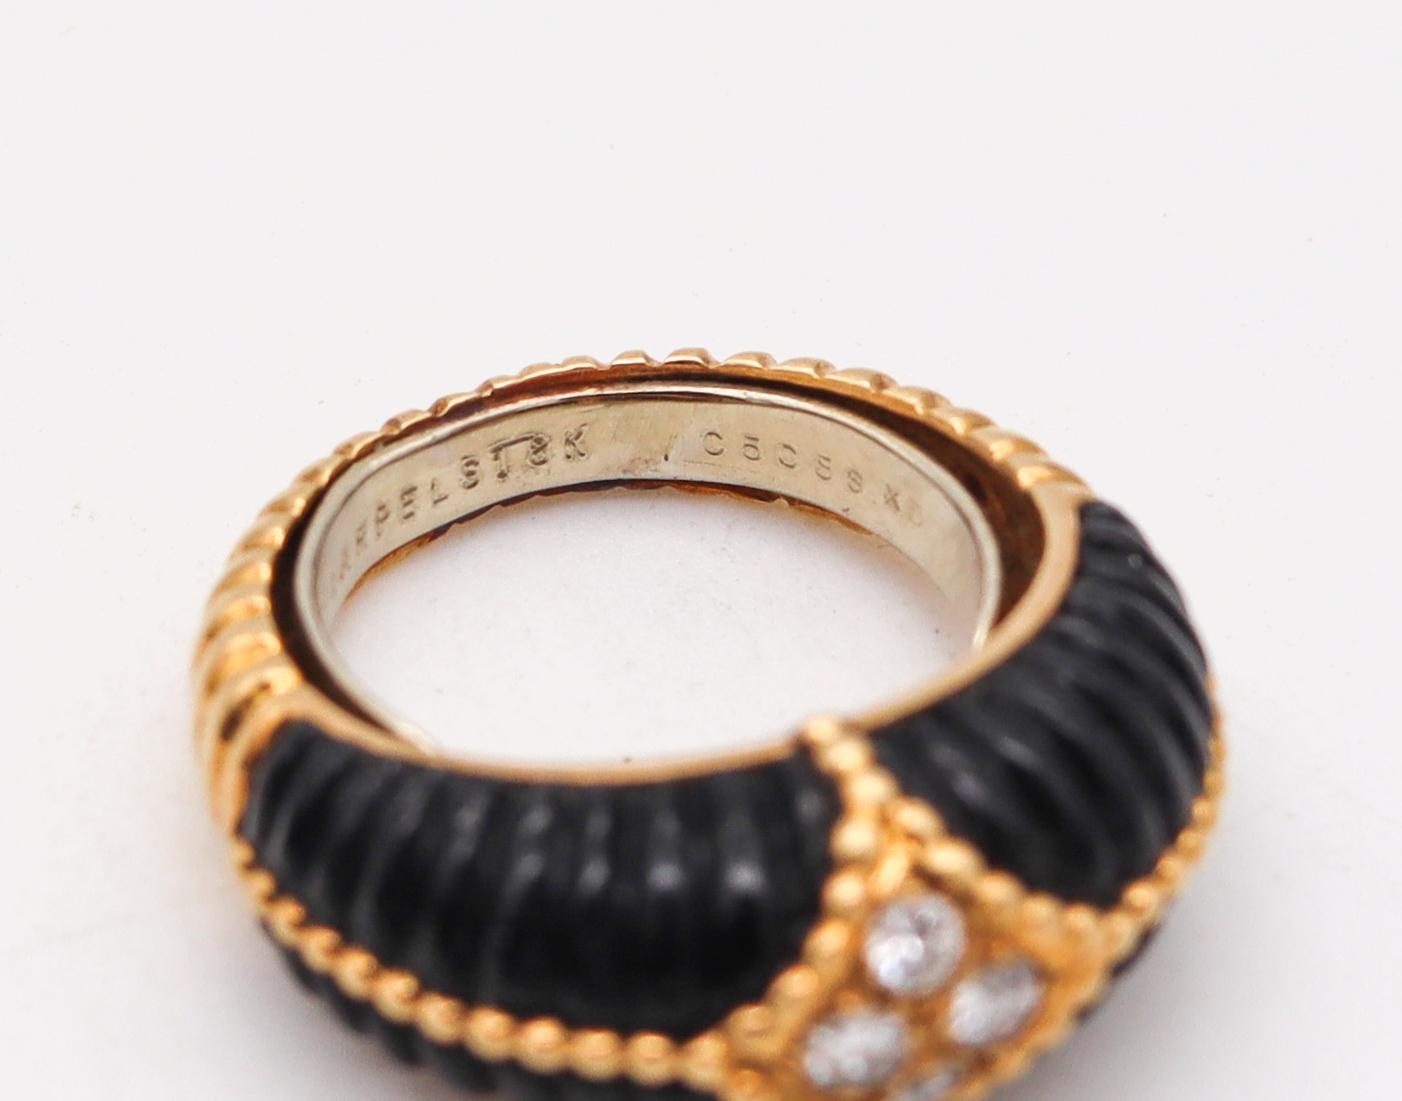 Van Cleef & Arpels 1970 Paris Fluted Onyx Ring in 18Kt Yellow Gold with Diamonds In Excellent Condition For Sale In Miami, FL